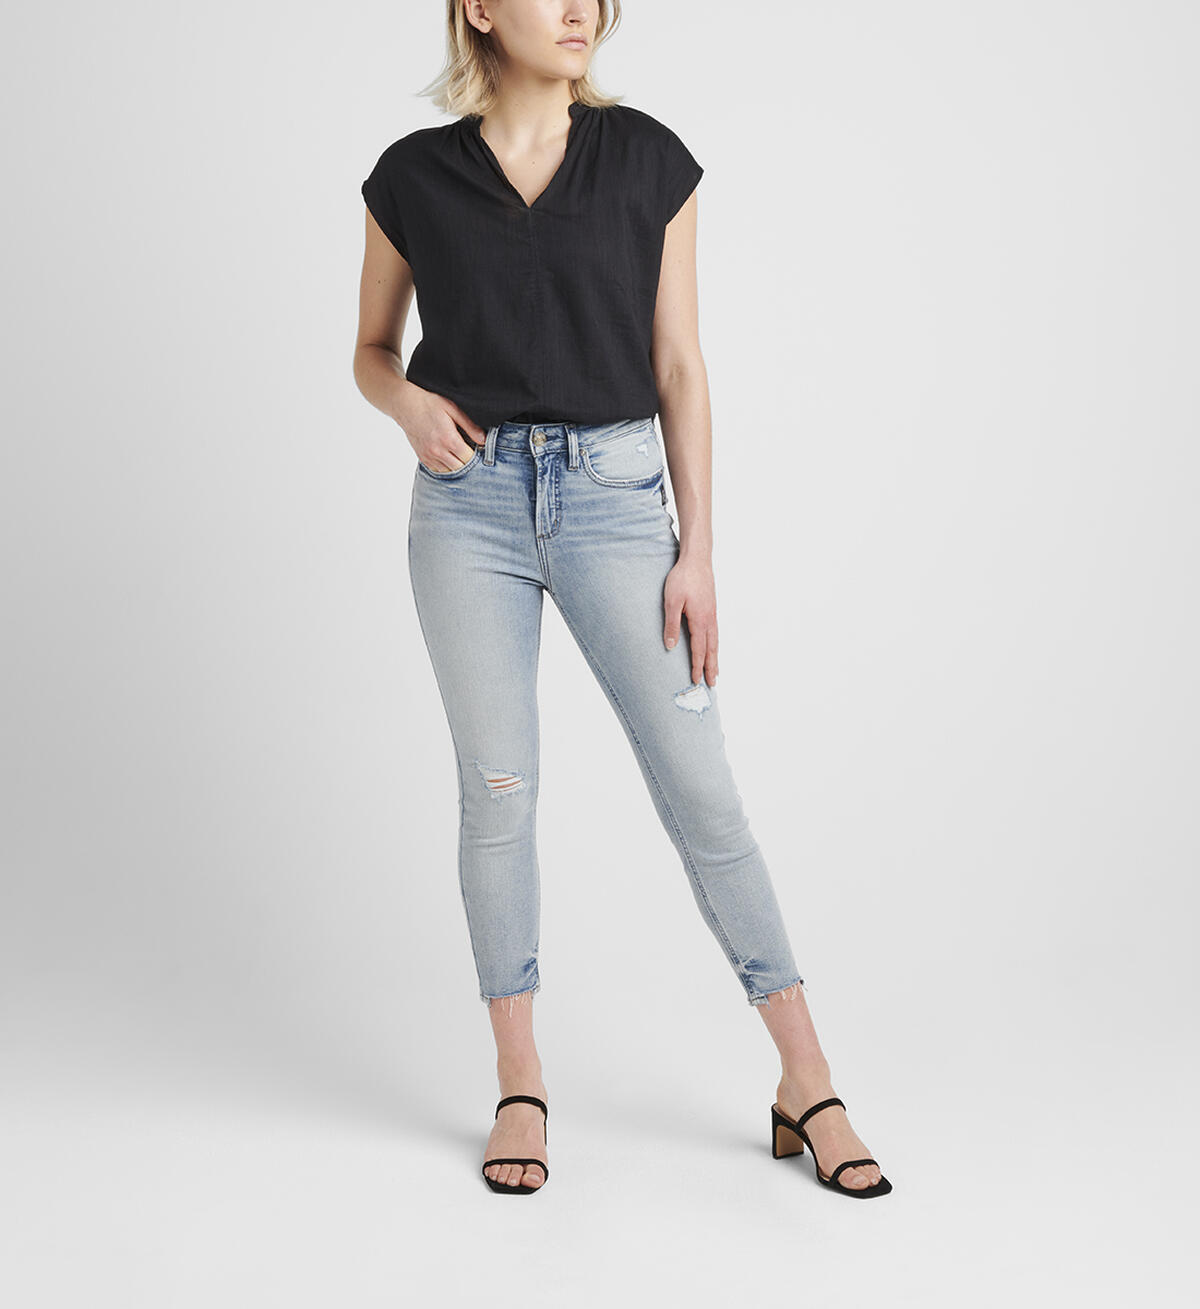 Avery High Rise Skinny Crop Jeans, , hi-res image number 0